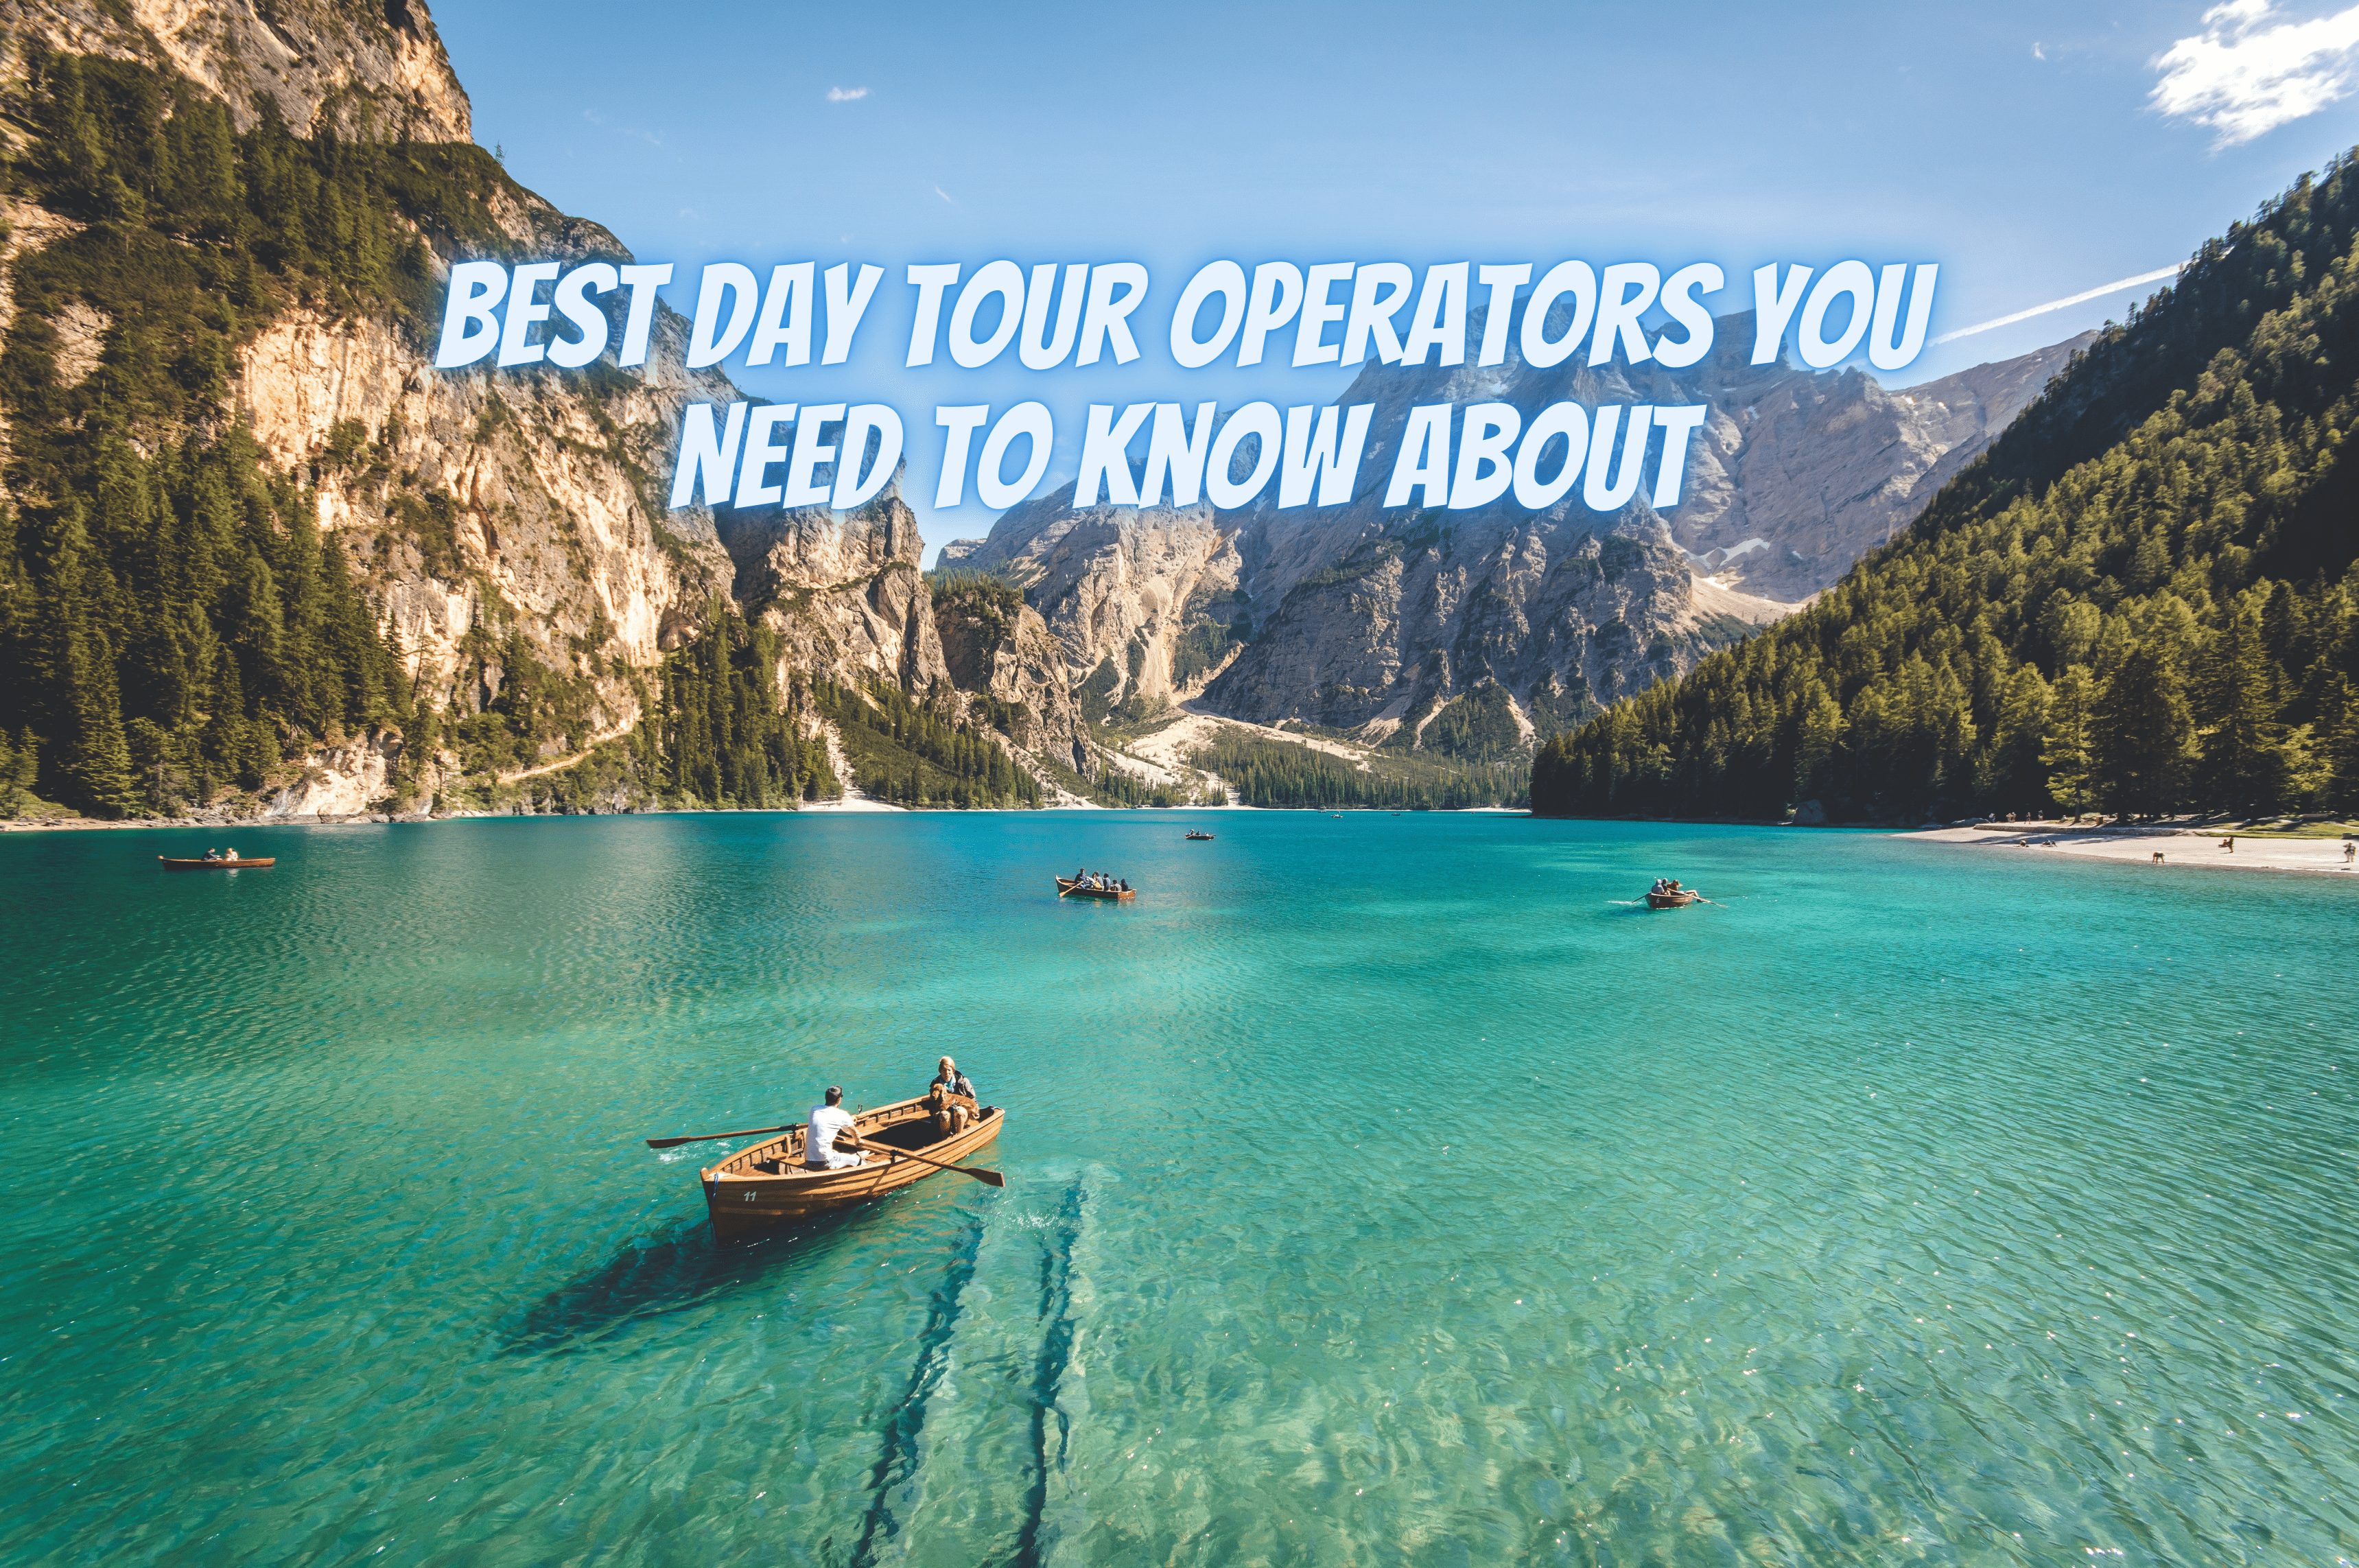 The 10 Best Day Tour Operators You Need to Know About